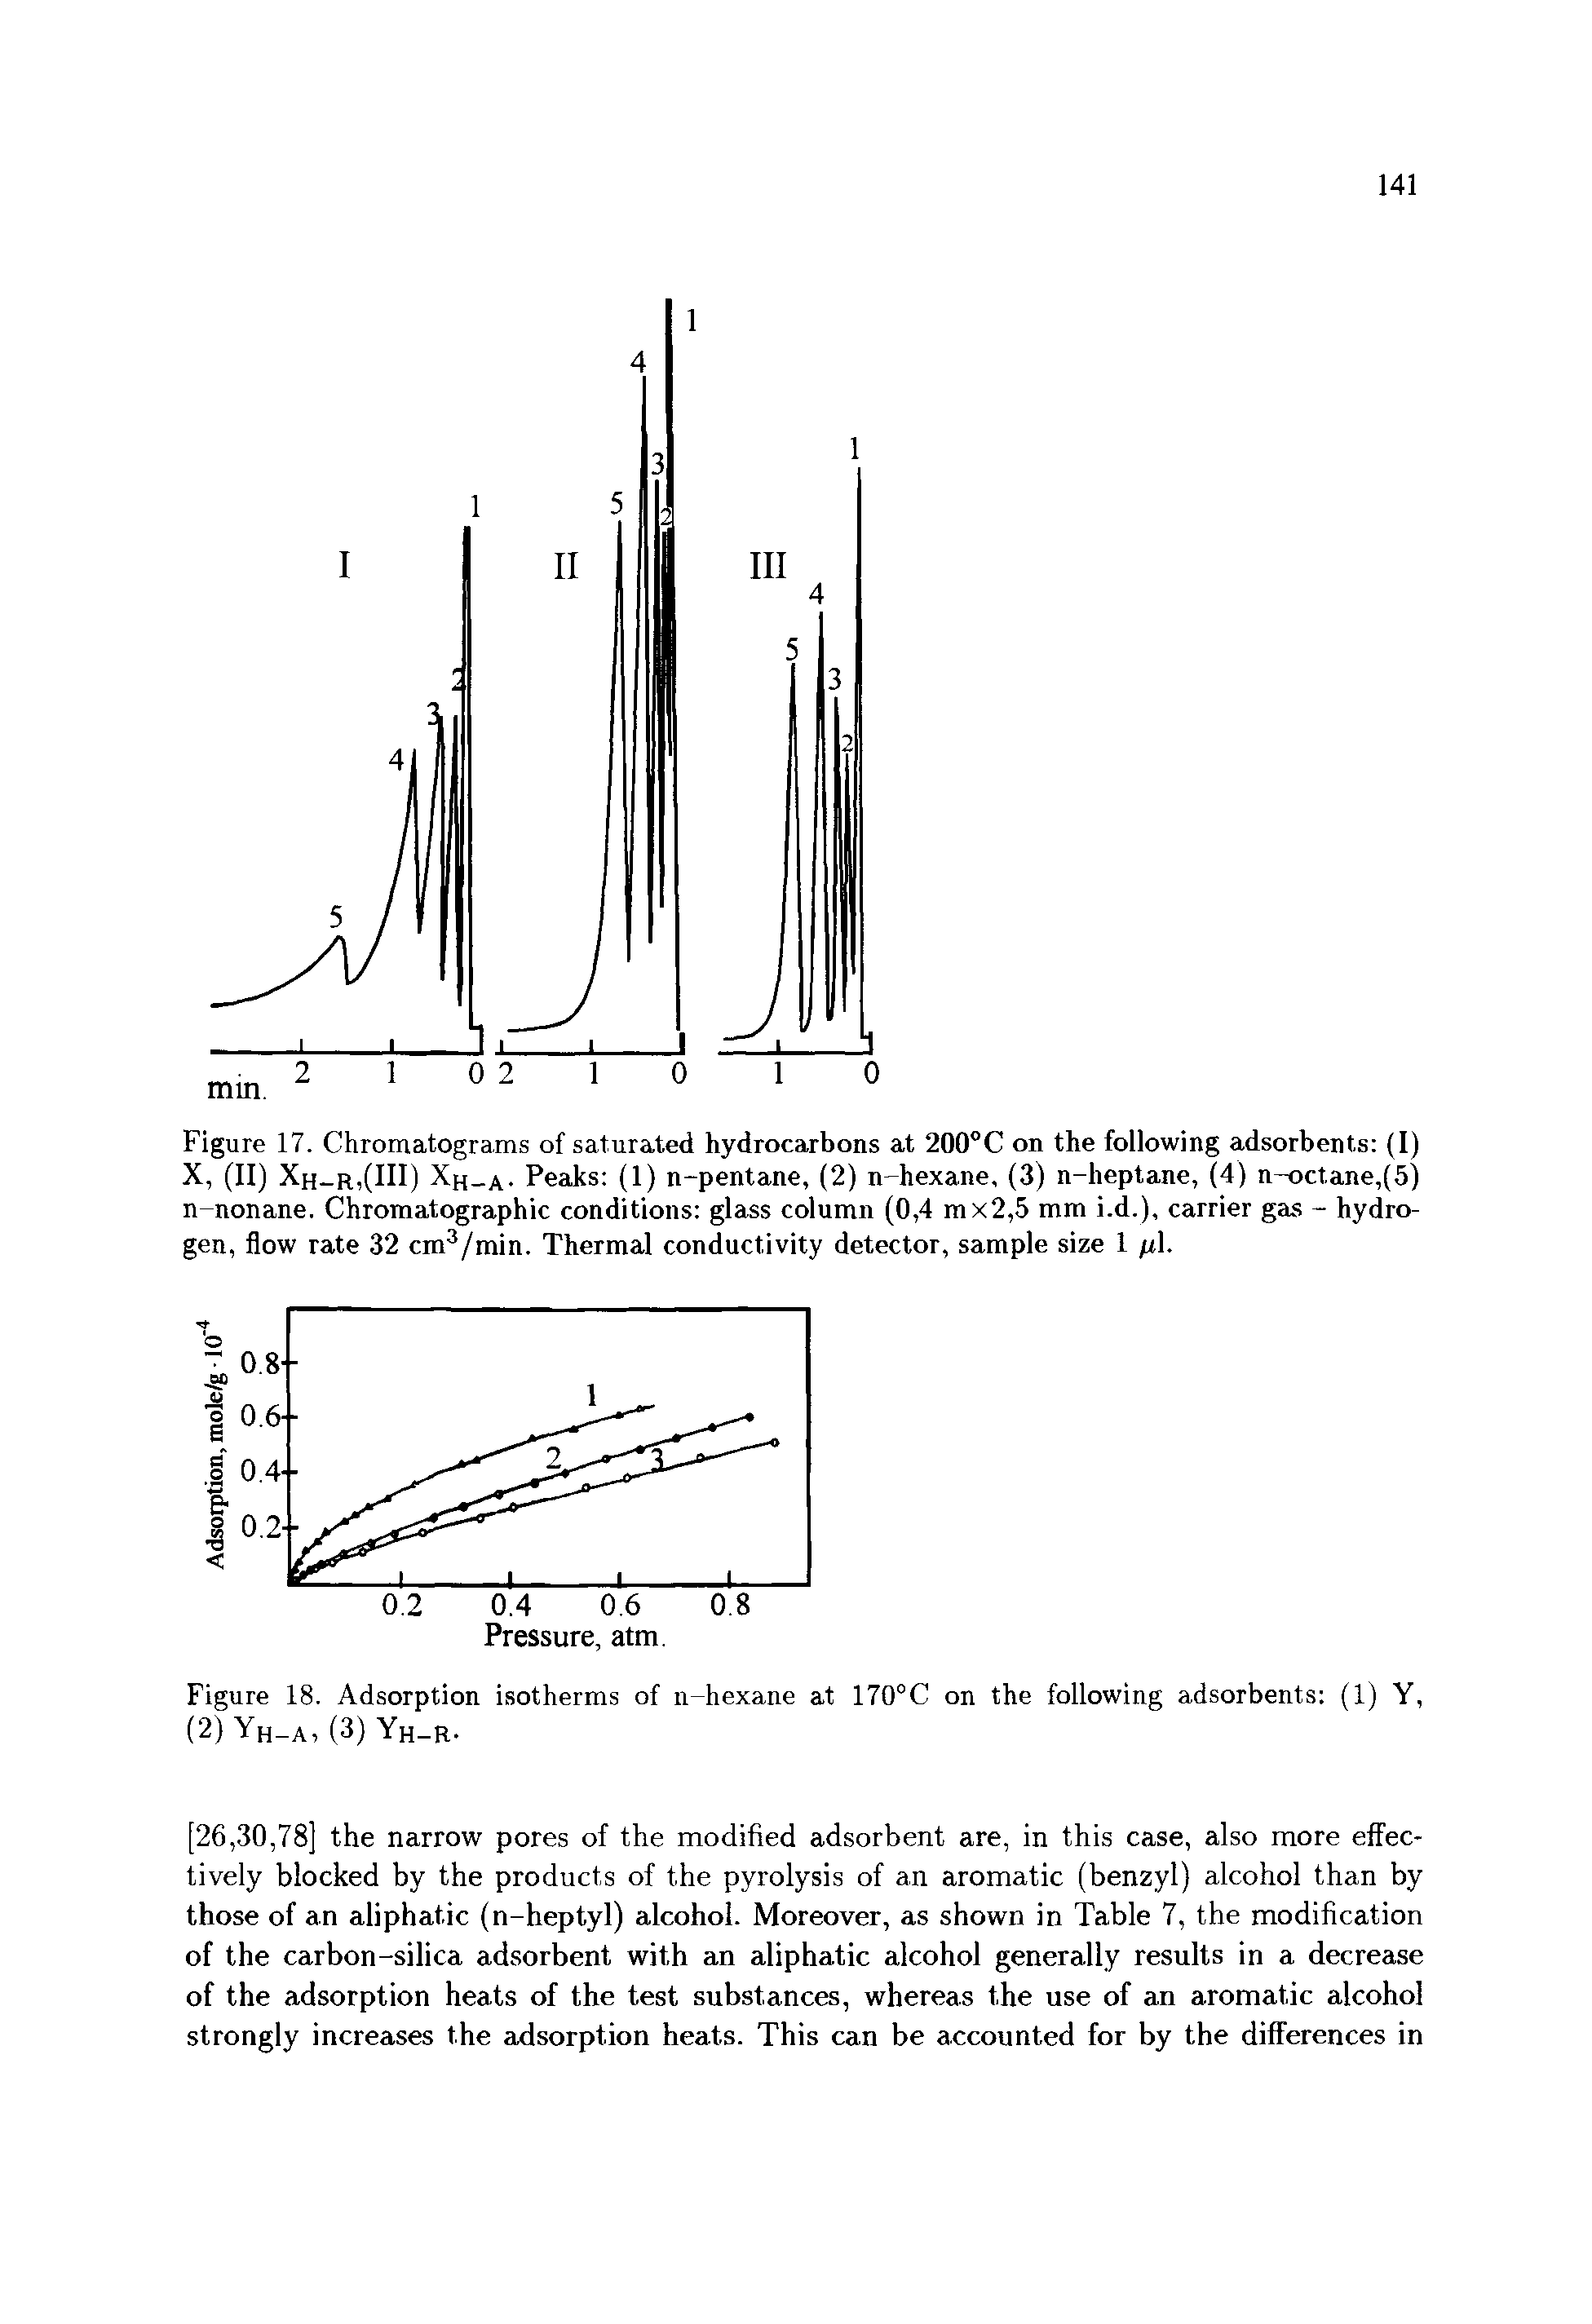 Figure 17. Chromatograms of saturated hydrocarbons at 200°C on the following adsorbents (I) X, (II) Xh-r,(III) Xh-a- PeaJcs (1) n-pentane, (2) n-hexane, (3) n-heptane, (4) n-octane,(5) n-nonane. Chromatographic conditions glass column (0,4 mx2,5 mm i.d.), carrier gas - hydrogen, flow rate 32 cm /min. Thermal conductivity detector, sample size 1 //I.